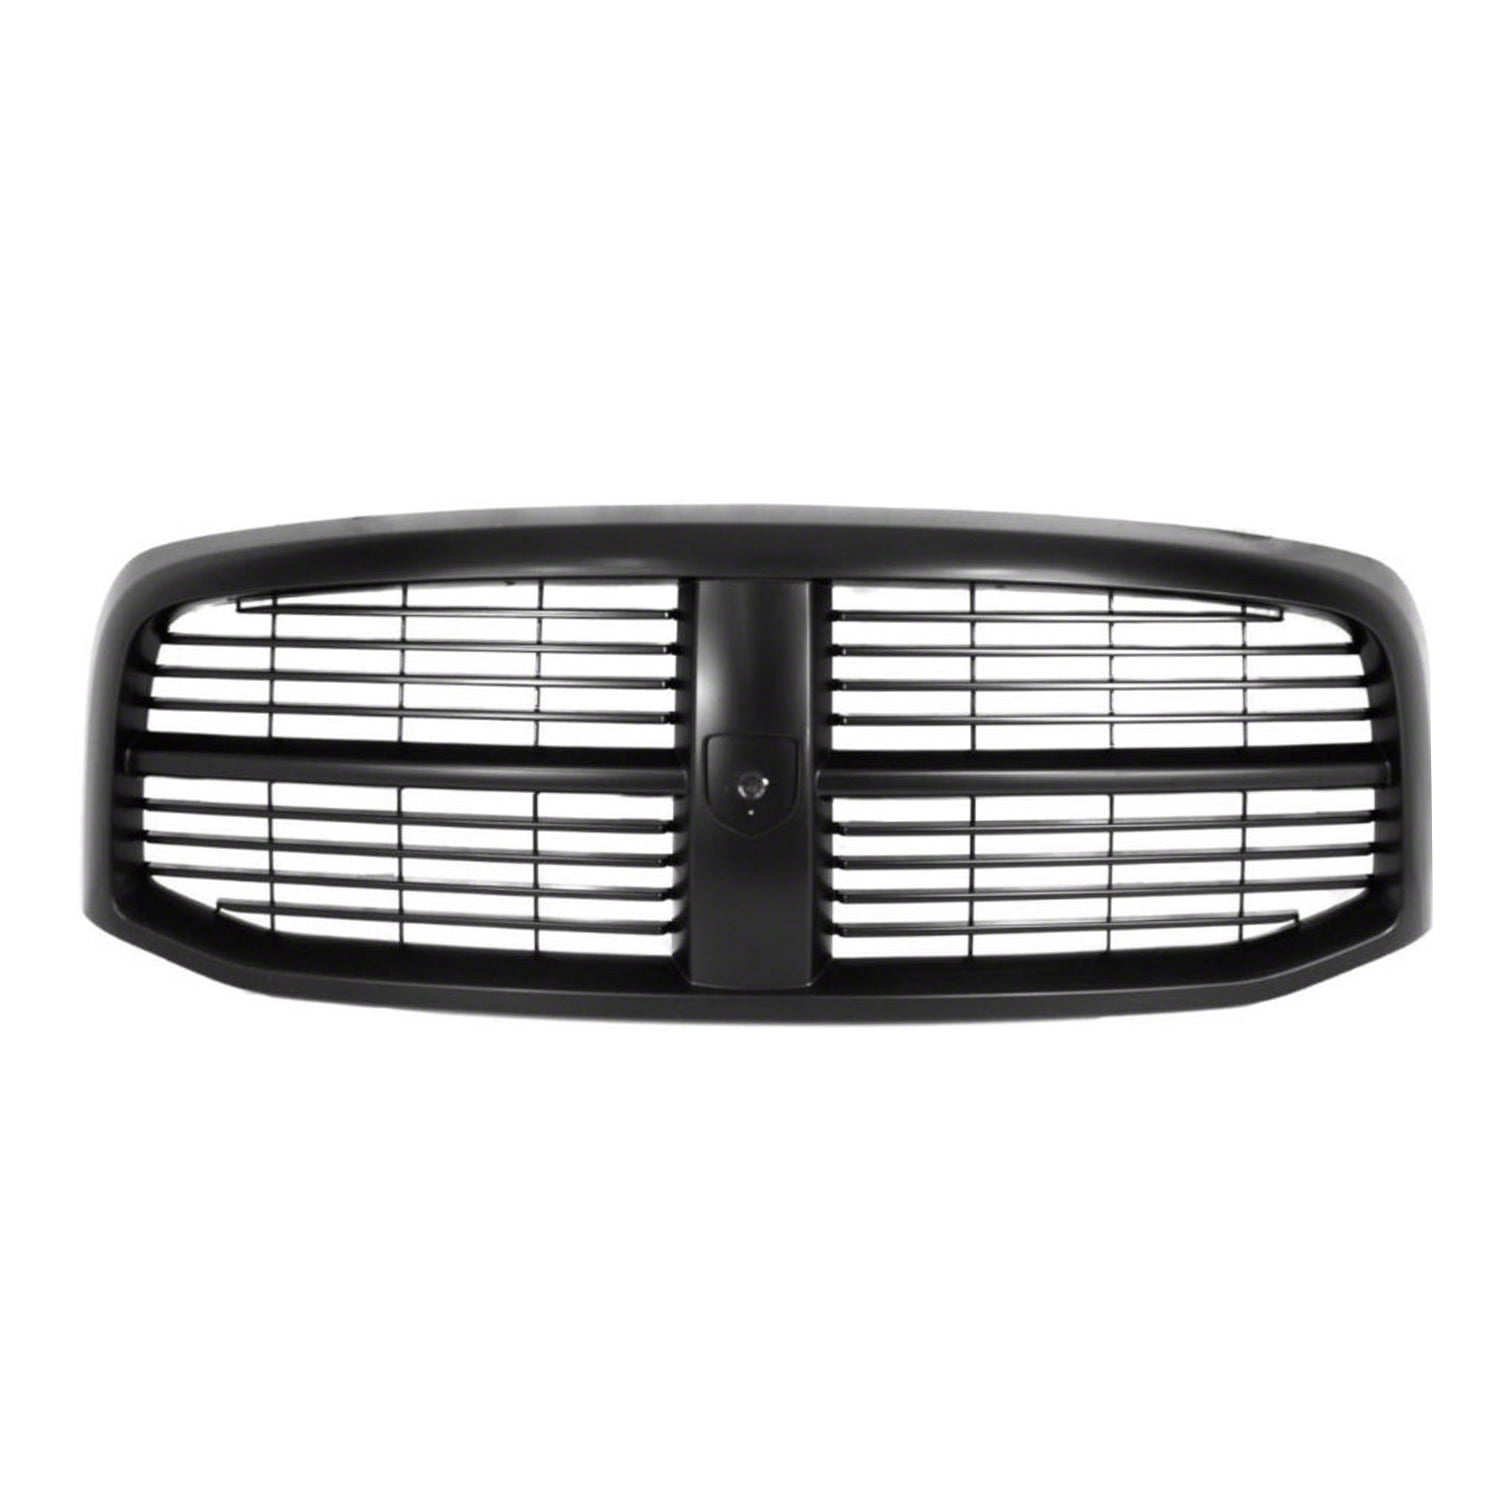 2008 Dodge Ram 1500 Front Grill Replacement